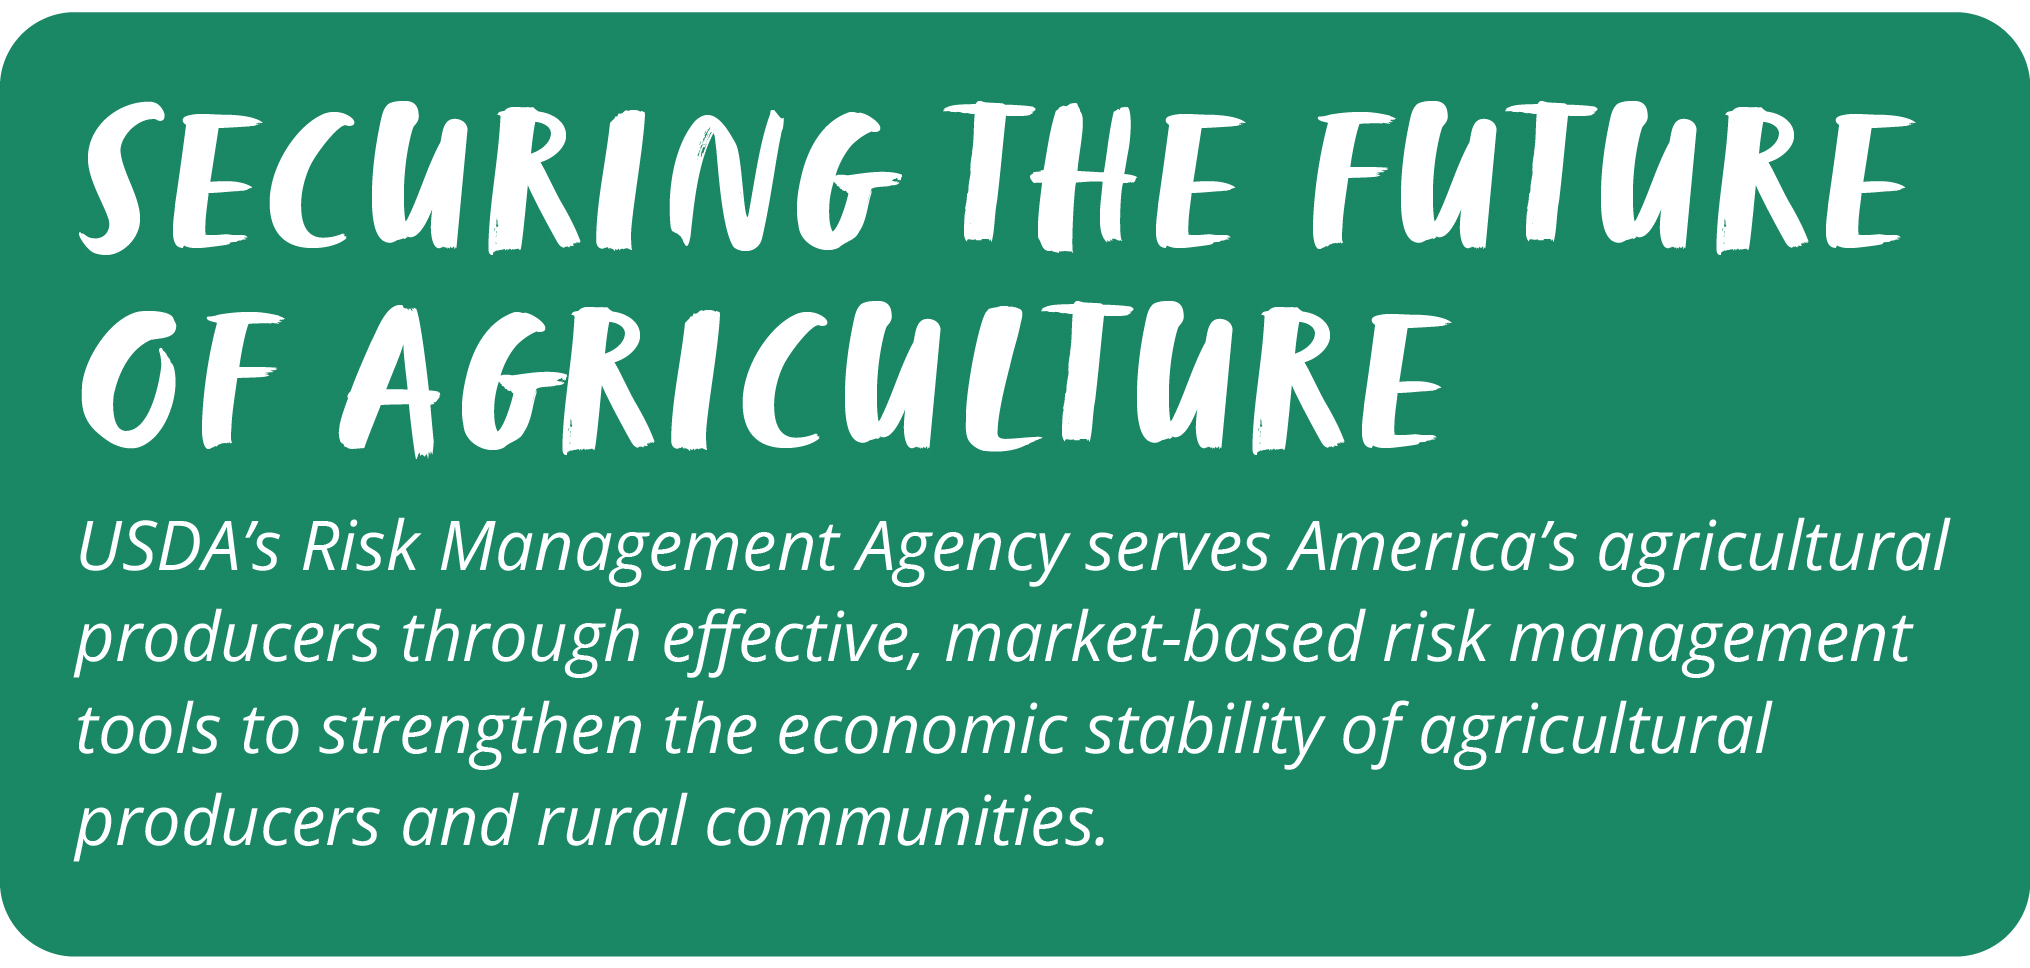 Securing the Future of Agriculture - USDA's Risk Management Agency serves America's agricultural producers through effective, market-based risk management tools to strengthen the economic stability of agricultural producers and rural communities.